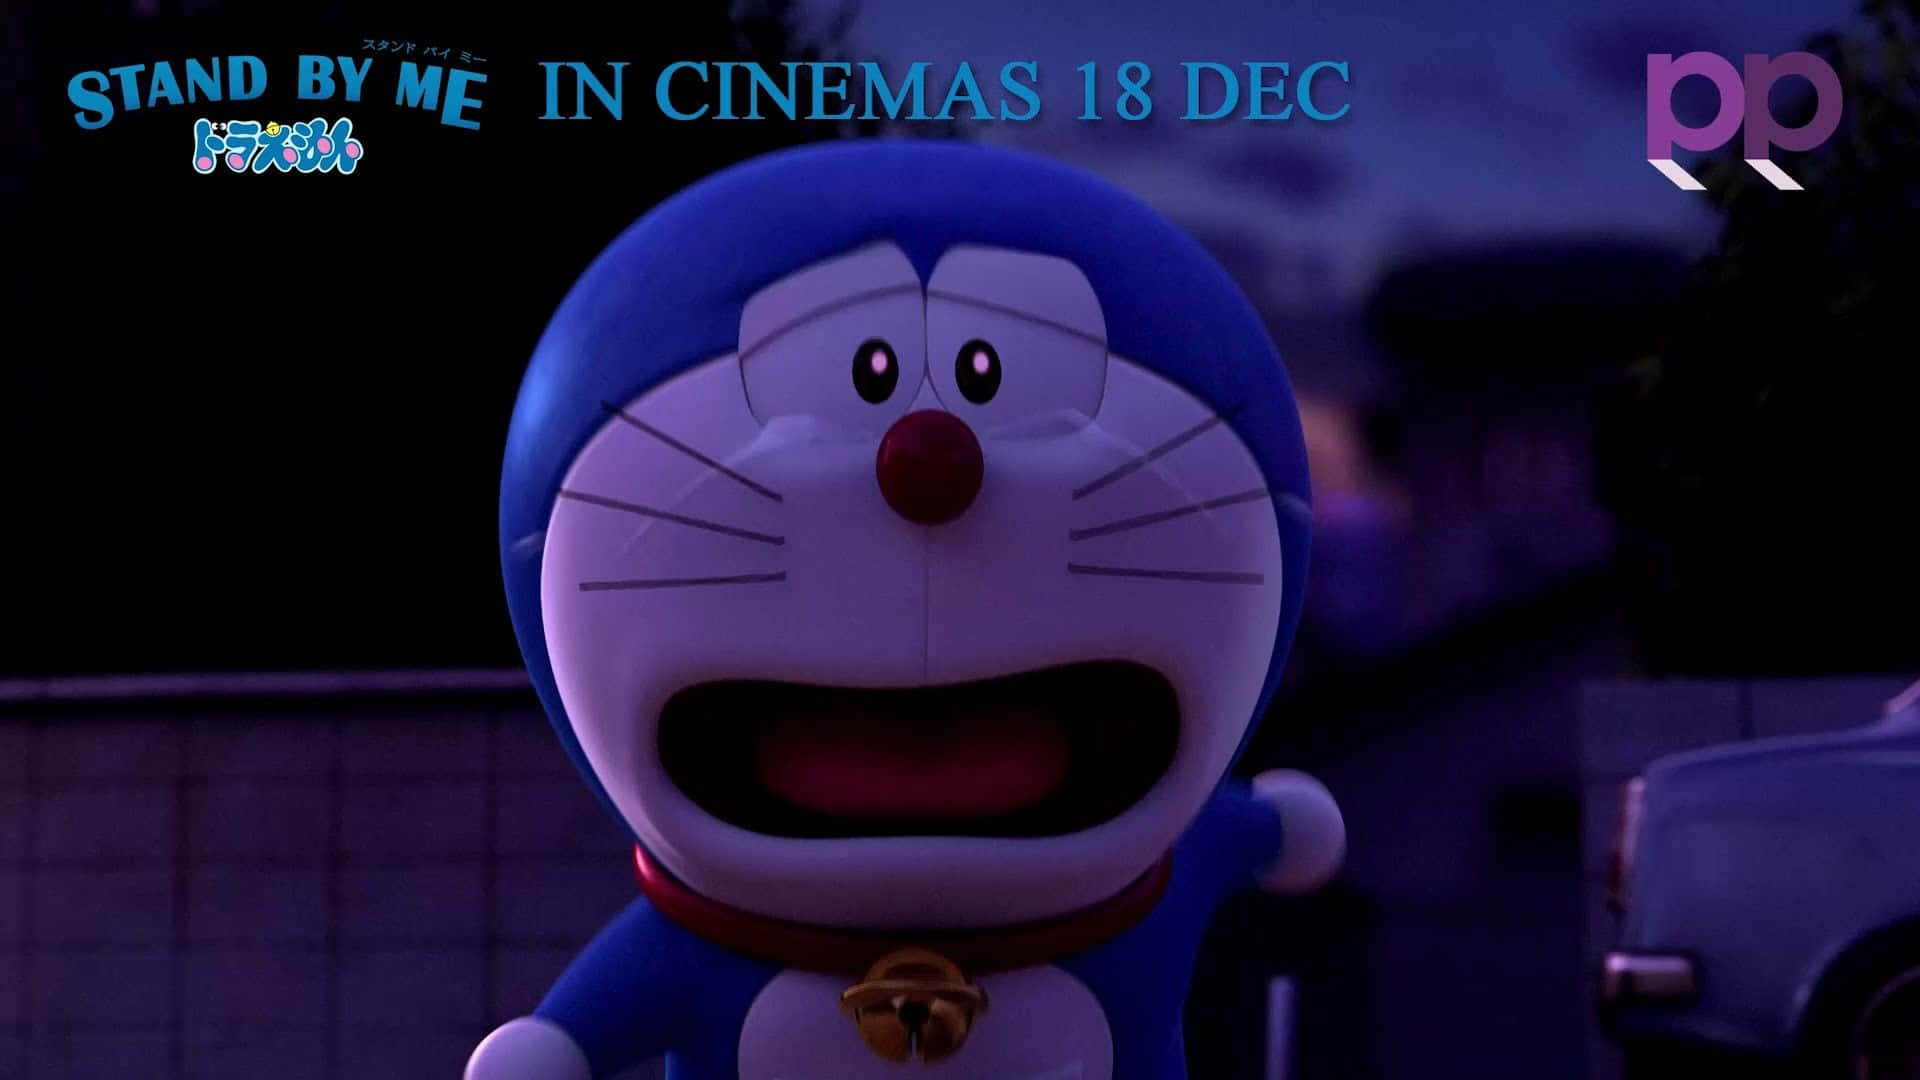 Join Doraemon in his adventures to help the future!